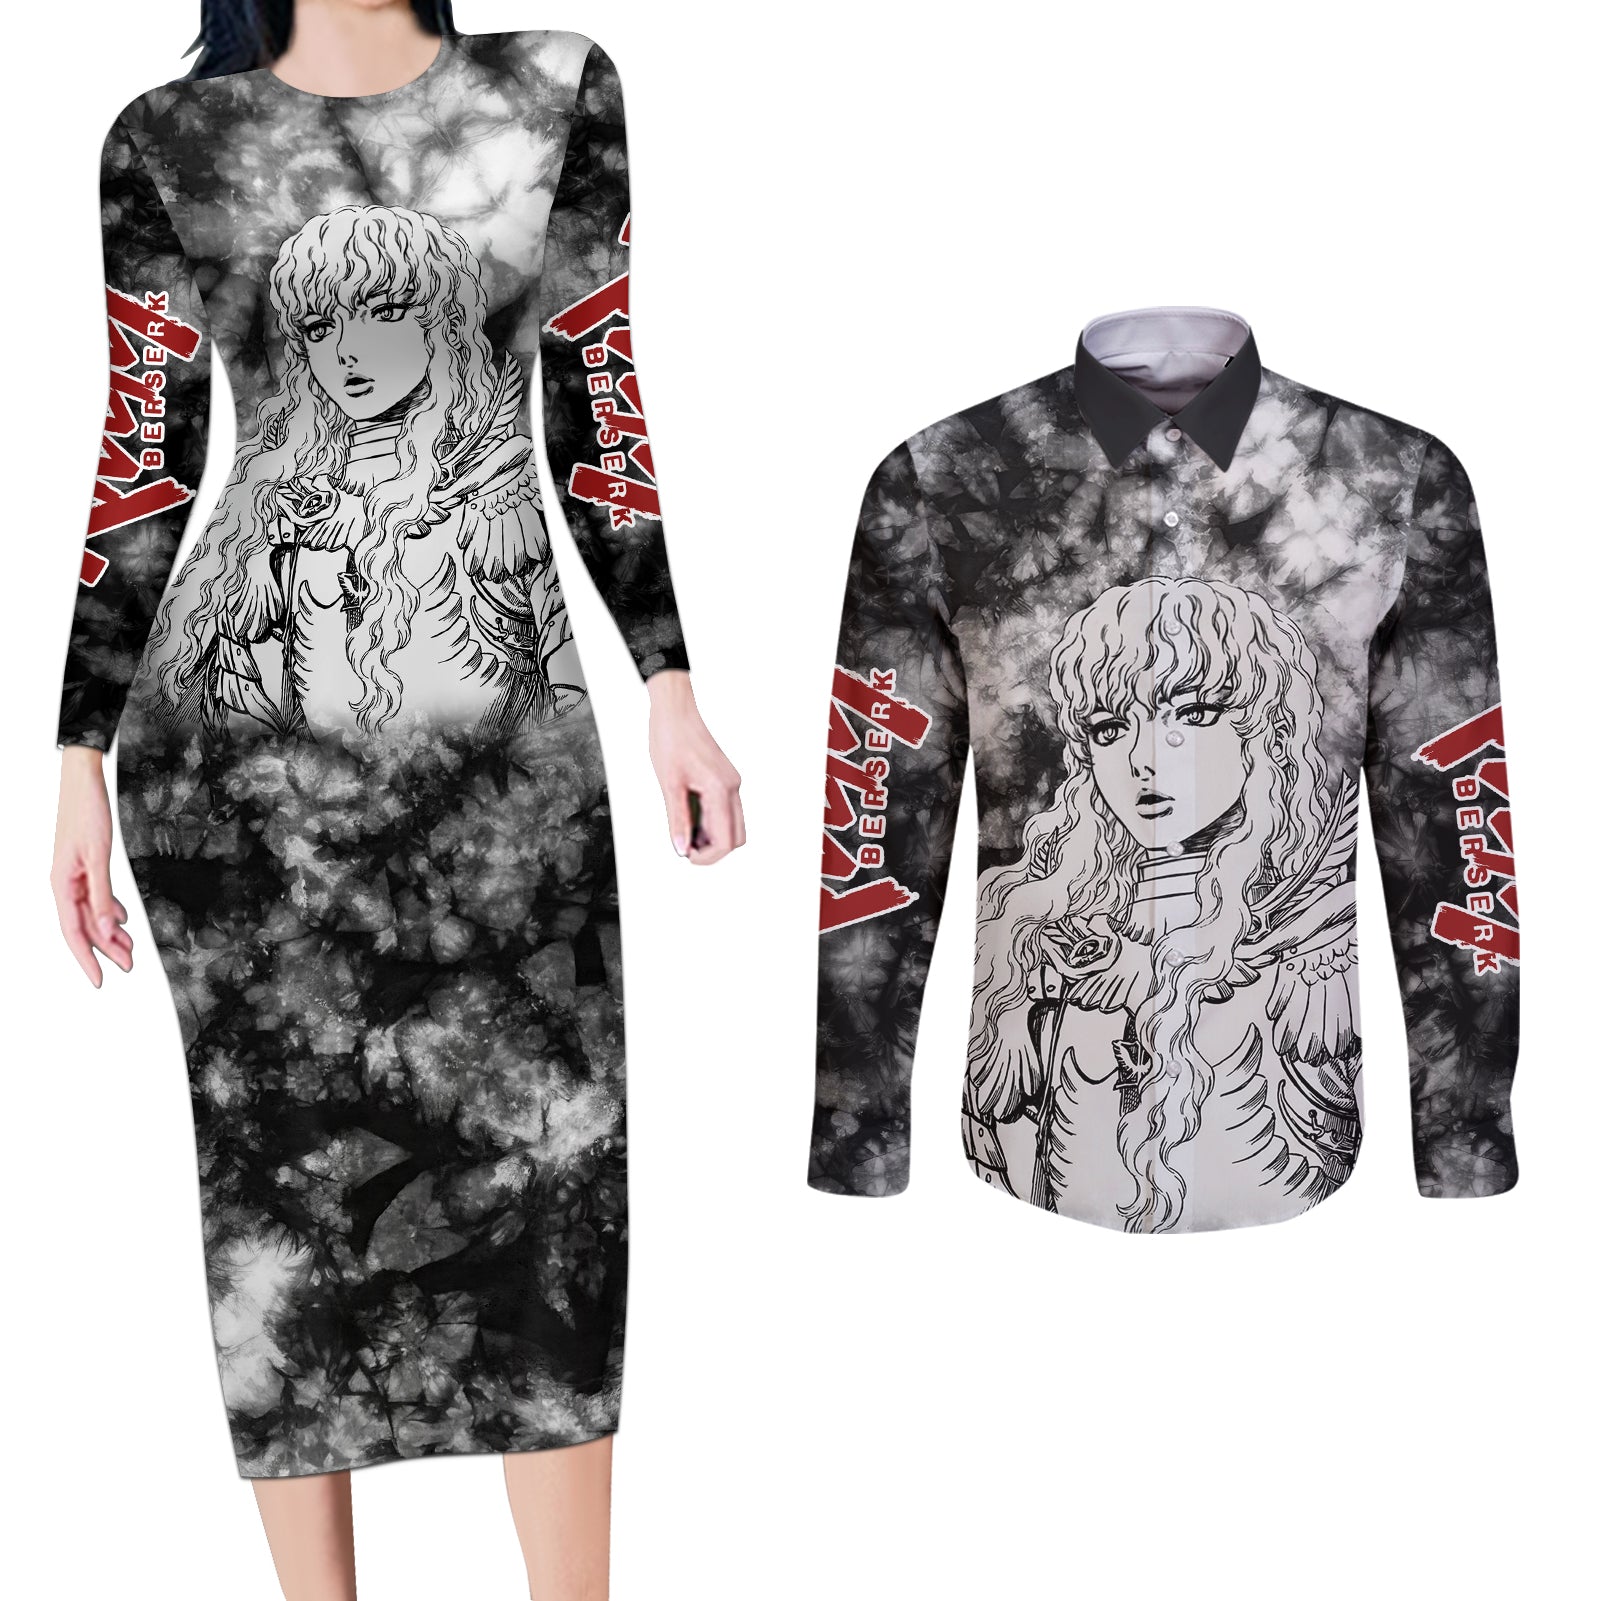 Griffith Berserk Couples Matching Long Sleeve Bodycon Dress and Long Sleeve Button Shirt Grunge Style